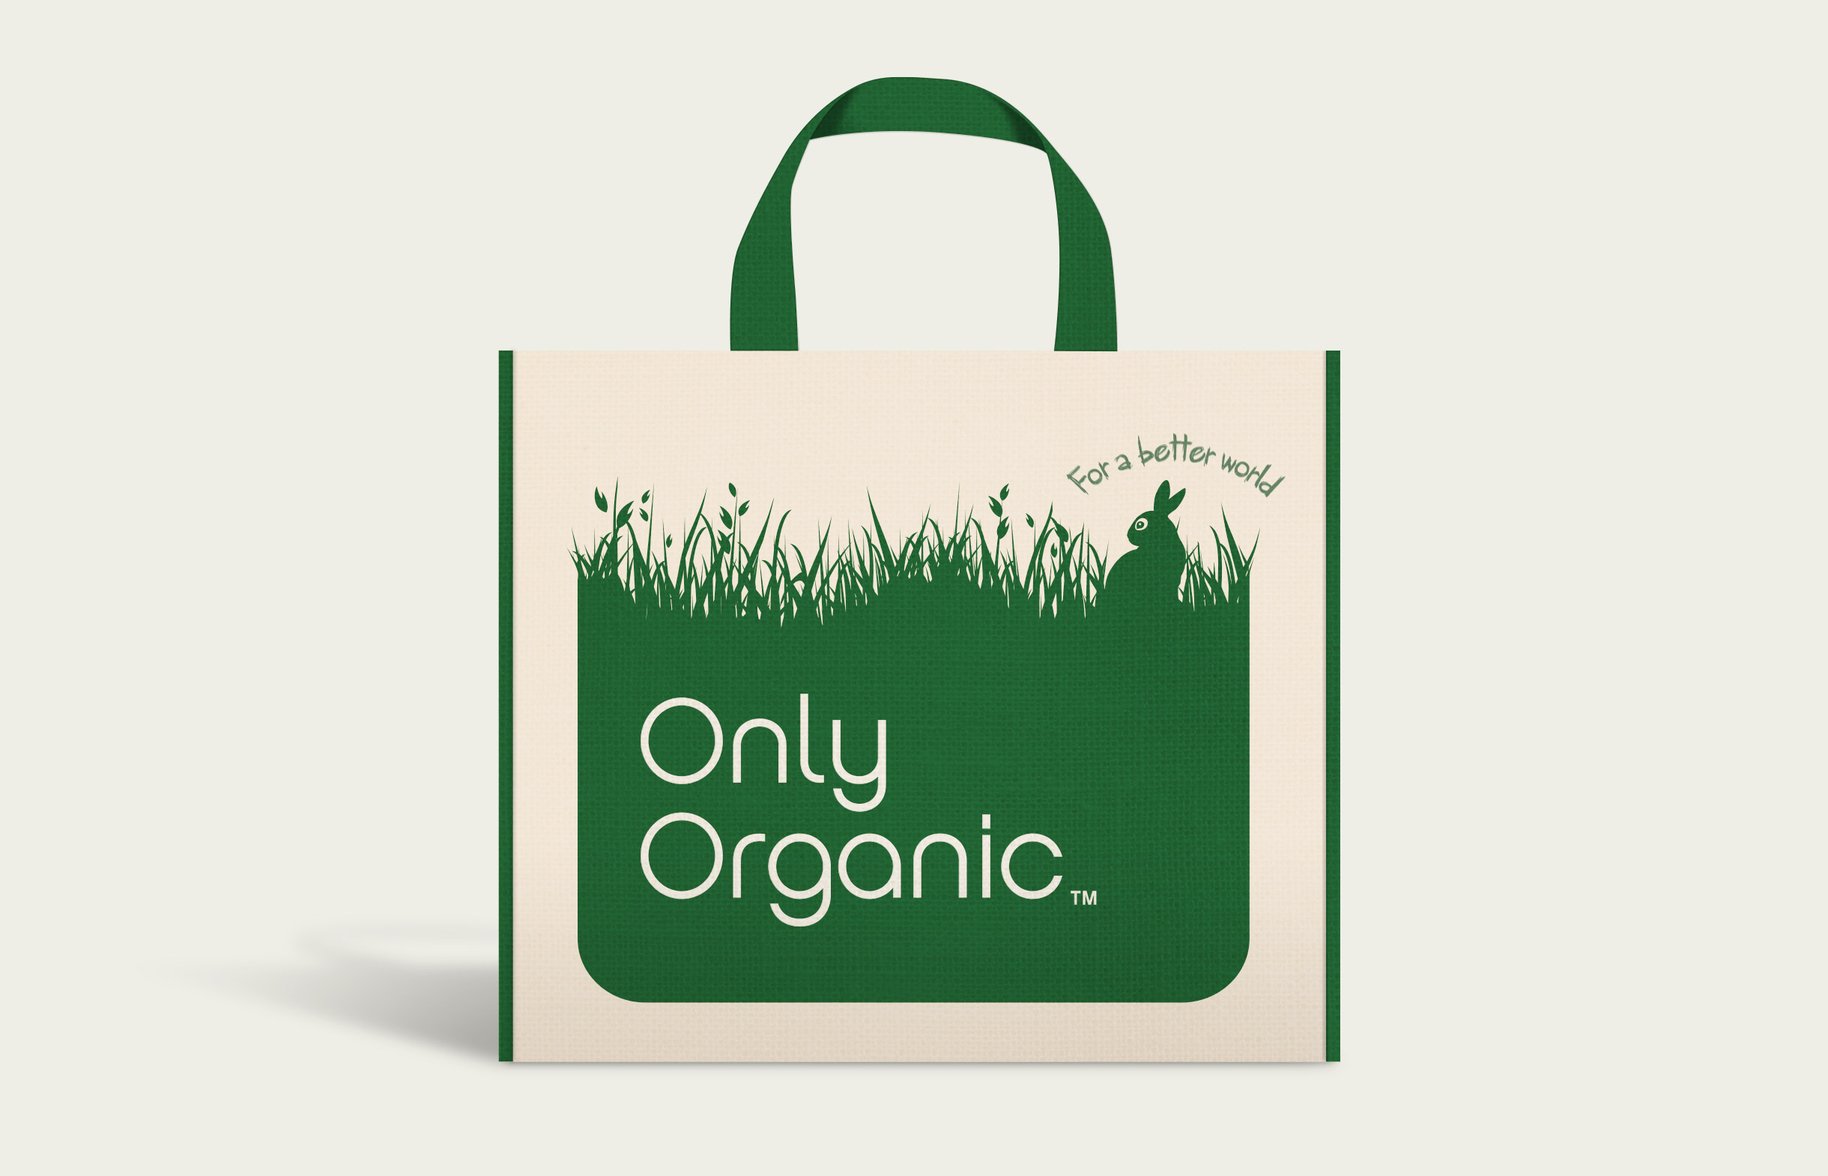 Only Organic branded textured tote bag